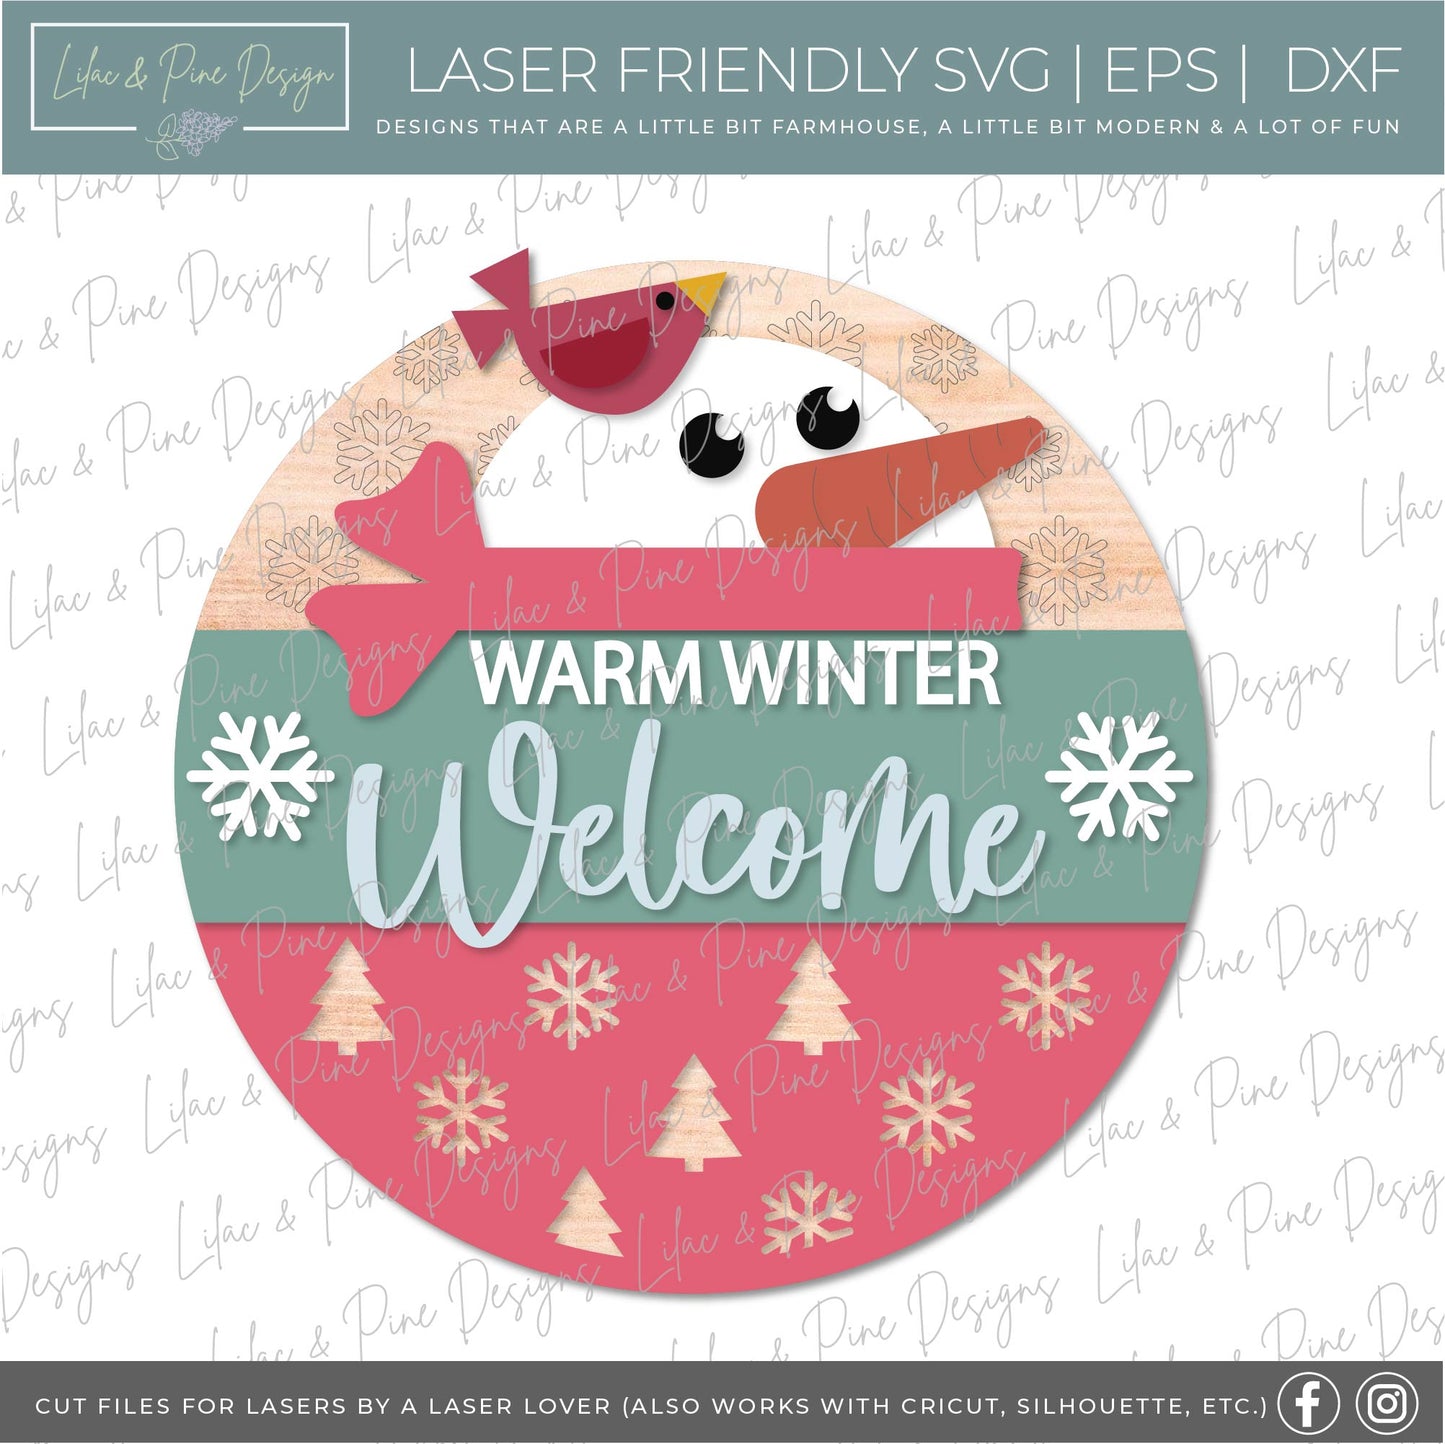 Warm Winter Welcome sign SVG, Snowman Welcome SVG, Winter decor SVG, Snowman porch sign SVG, Winter round sign, laser cut file, Glowforge SVG